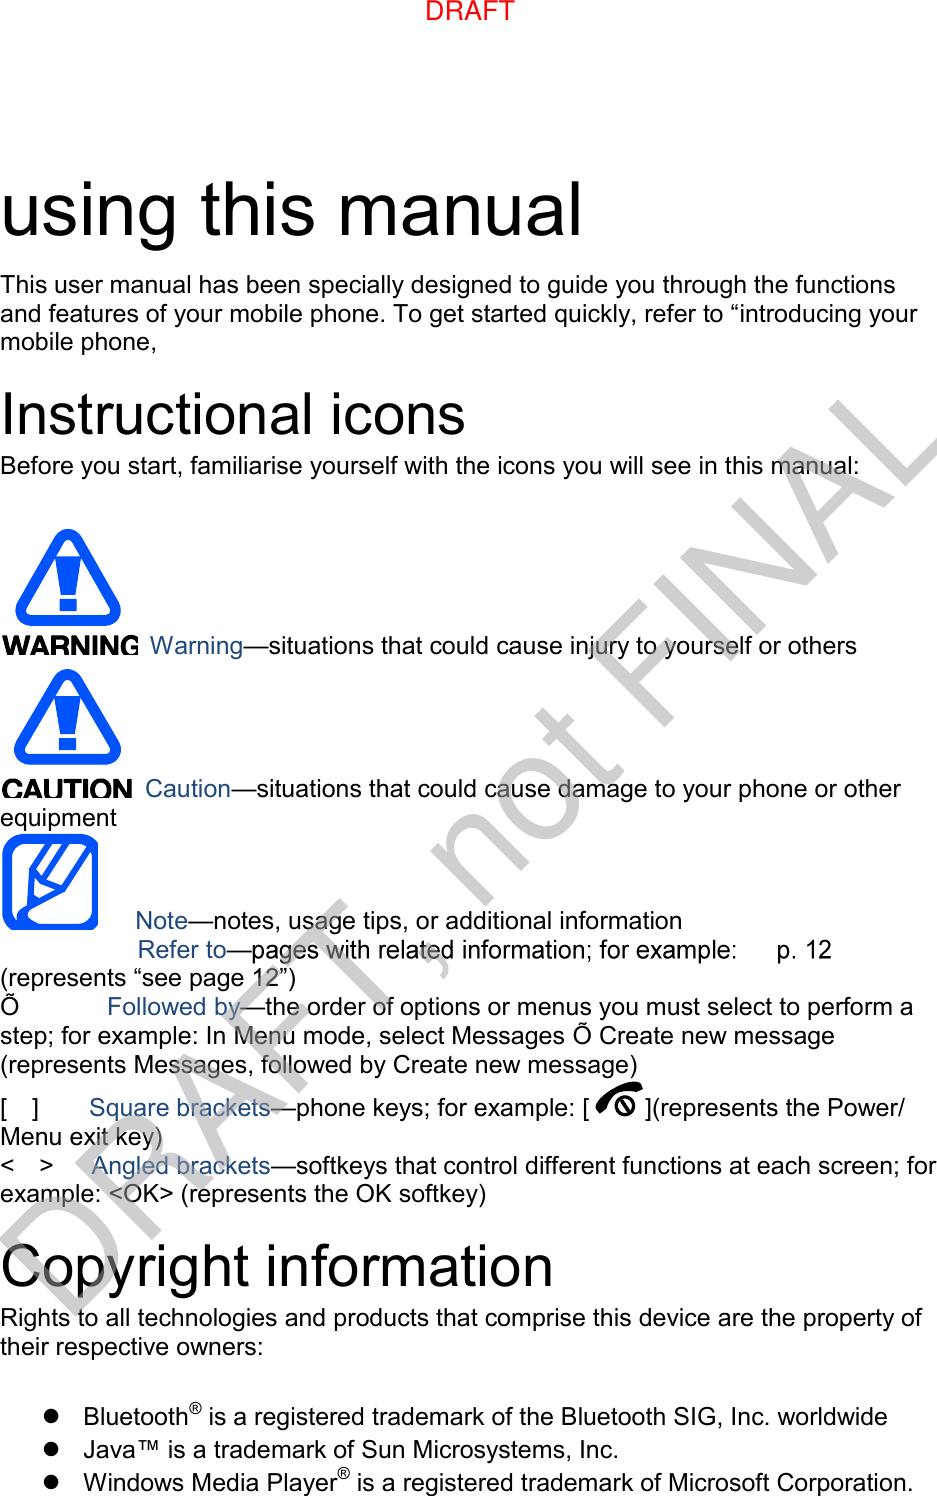 using this manual This user manual has been specially designed to guide you through the functions and features of your mobile phone. To get started quickly, refer to “introducing your mobile phone, Instructional icons Before you start, familiarise yourself with the icons you will see in this manual: Warning—situations that could cause injury to yourself or others Caution—situations that could cause damage to your phone or other equipment Note—notes, usage tips, or additional information     Refer to—(represents “see page 12”) Õ      Followed by—the order of options or menus you must select to perform a step; for example: In Menu mode, select Messages Õ Create new message (represents Messages, followed by Create new message) [    ]    Square brackets—phone keys; for example: [ ](represents the Power/ Menu exit key) &lt;    &gt;    Angled brackets—softkeys that control different functions at each screen; for example: &lt;OK&gt; (represents the OK softkey) Copyright information Rights to all technologies and products that comprise this device are the property of their respective owners: Bluetooth® is a registered trademark of the Bluetooth SIG, Inc. worldwideJava™ is a trademark of Sun Microsystems, Inc.Windows Media Player® is a registered trademark of Microsoft Corporation.DRAFT, not FINALDRAFT